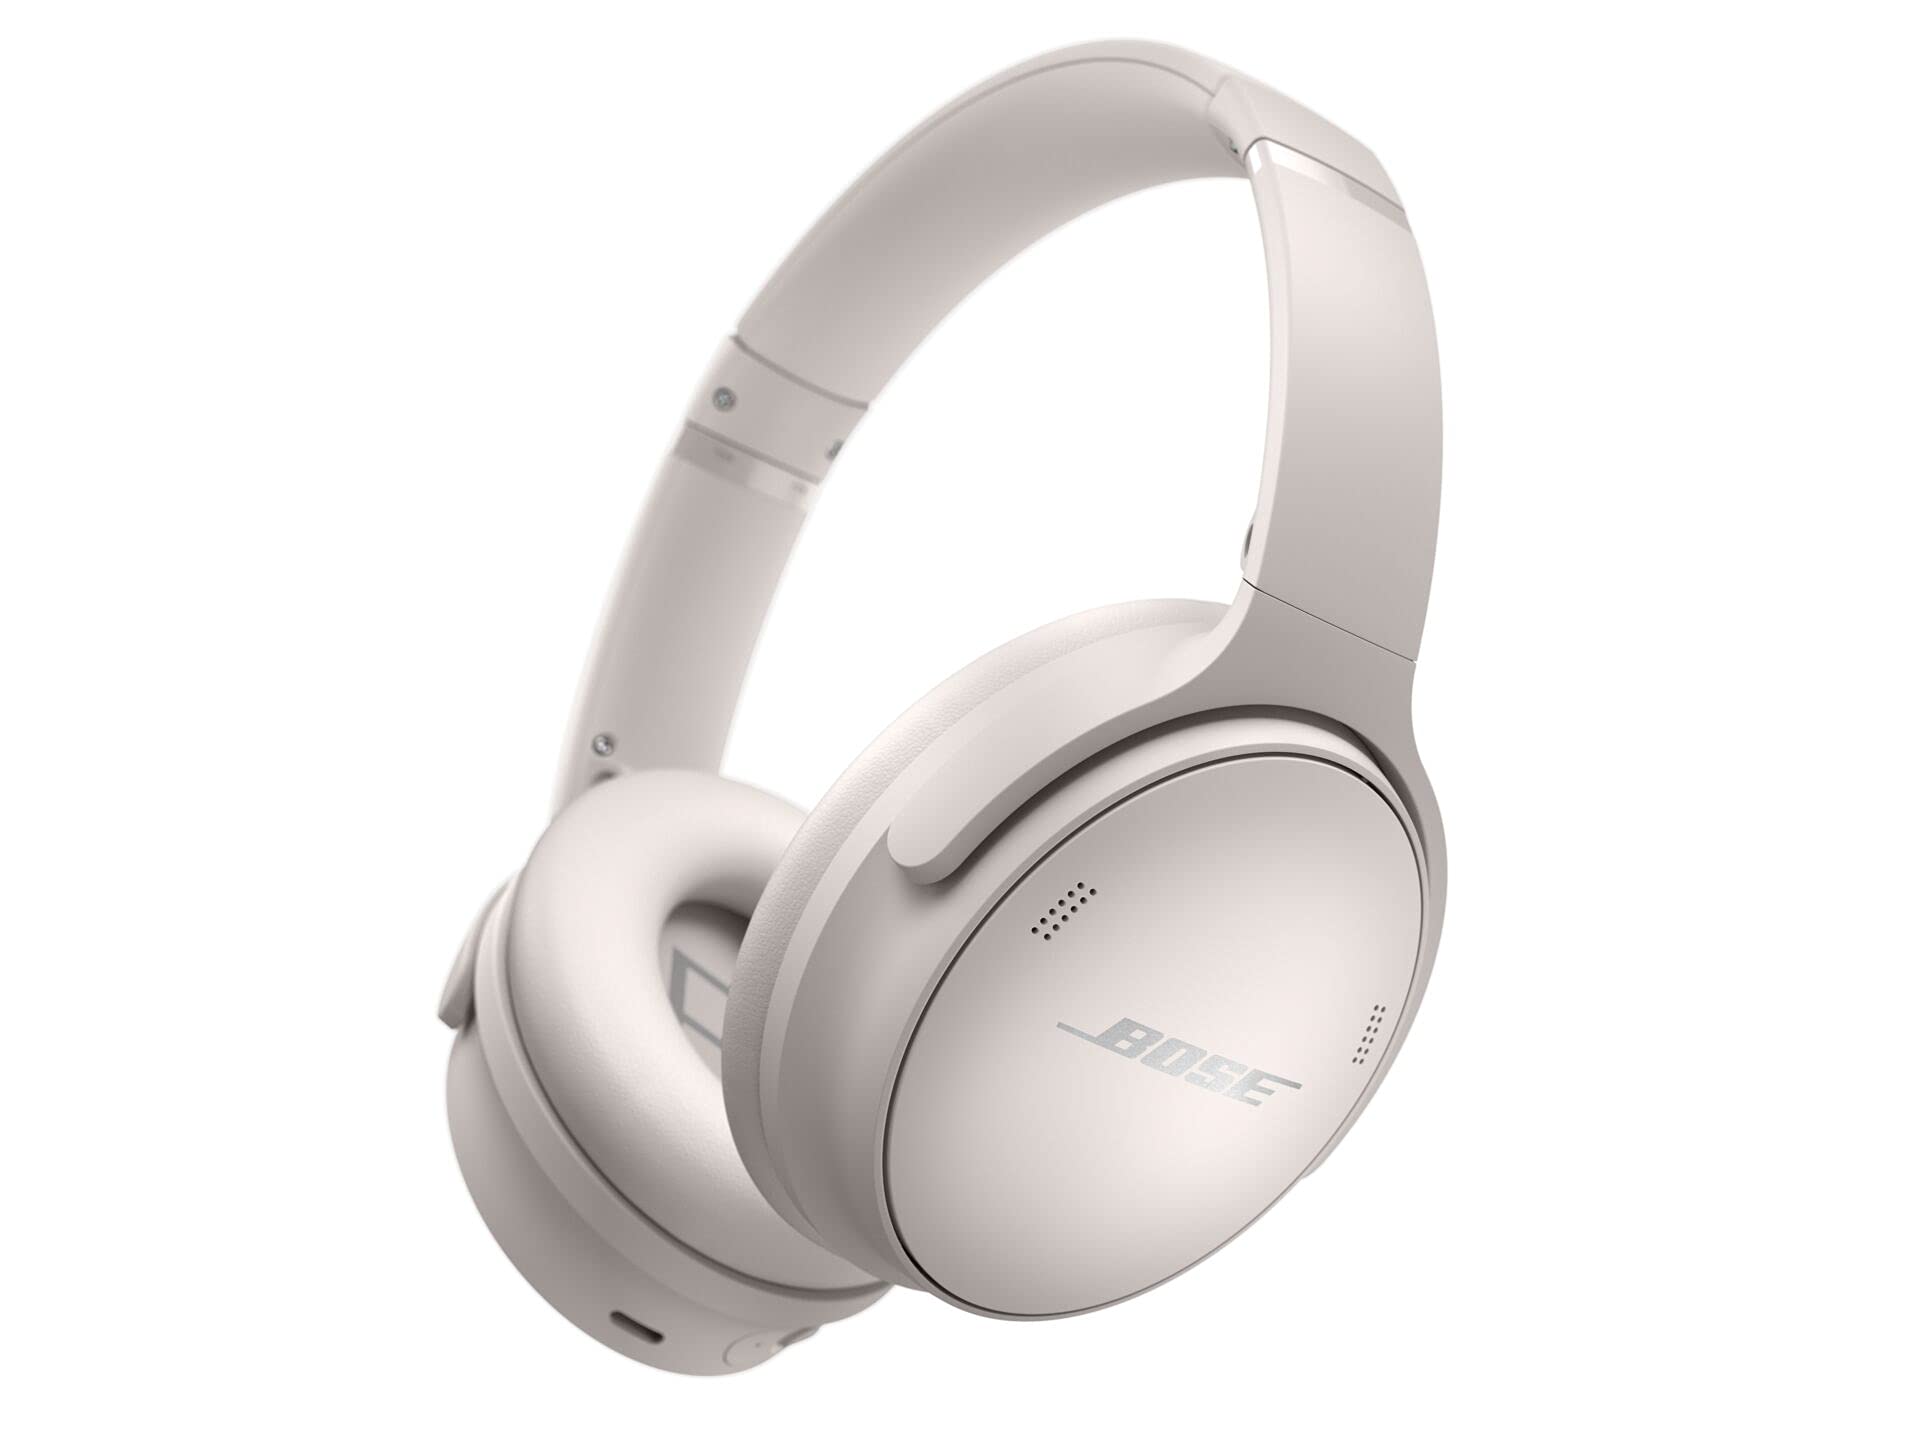 BOSE Cute Wireless Headphones with Noise Cancellation